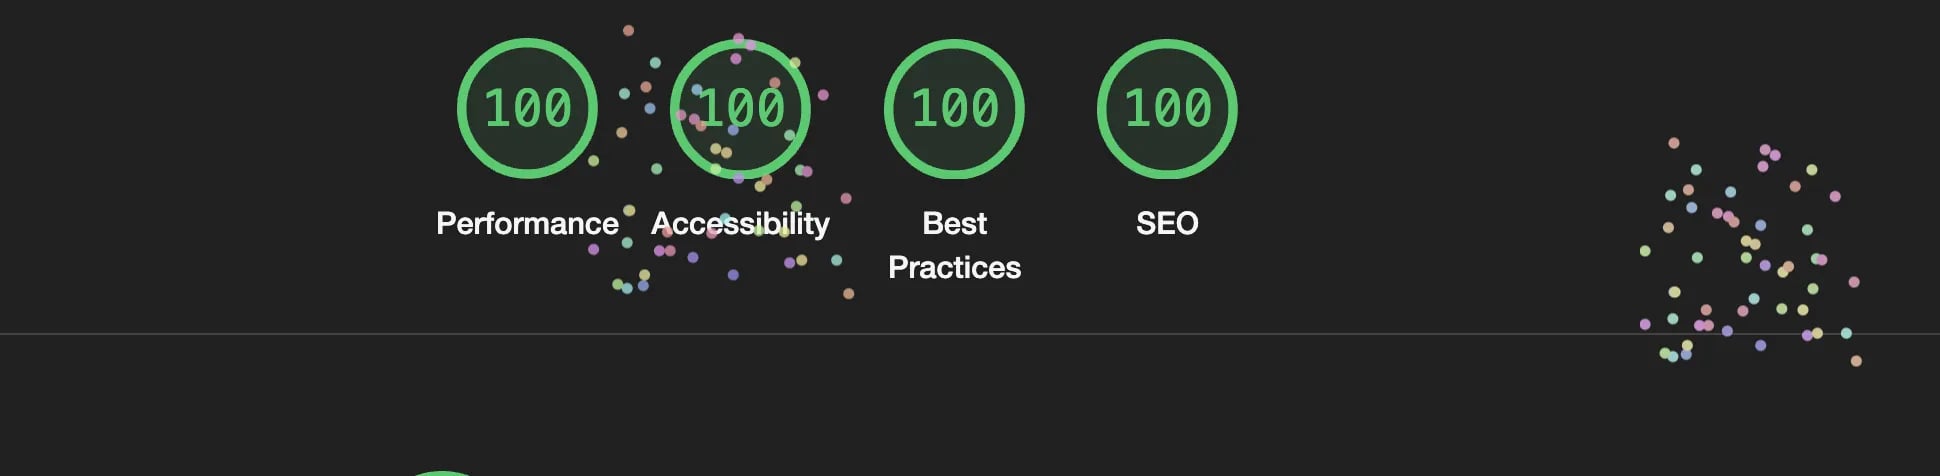 Perfect lighthouse scores on Webstudio site